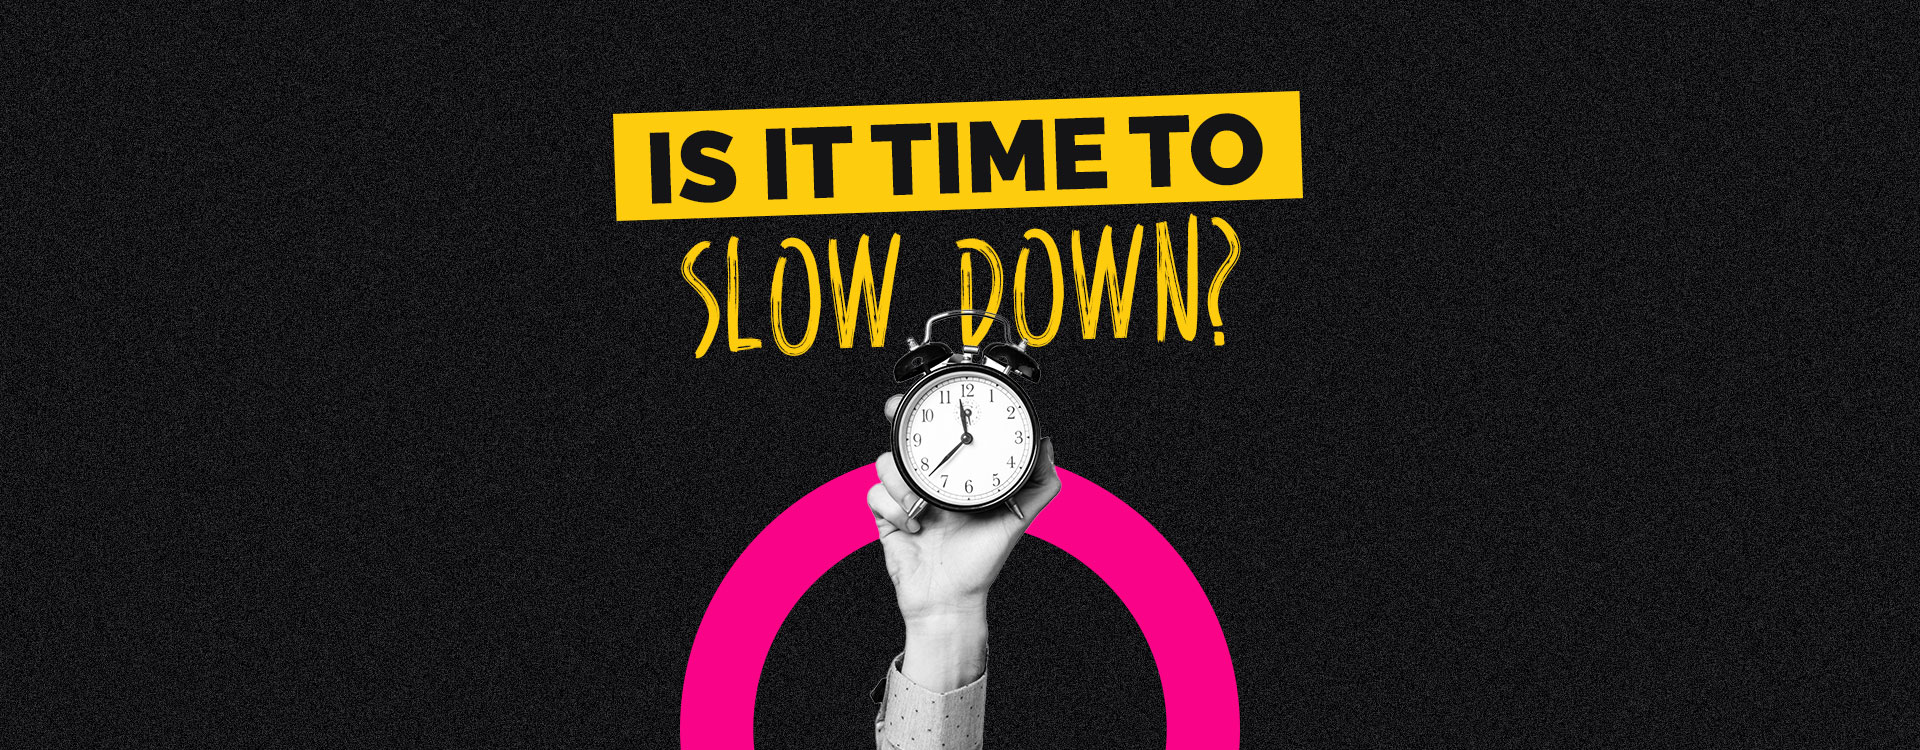 Beyond the Rush: The Case for Slow Marketing in a Fast-Paced World